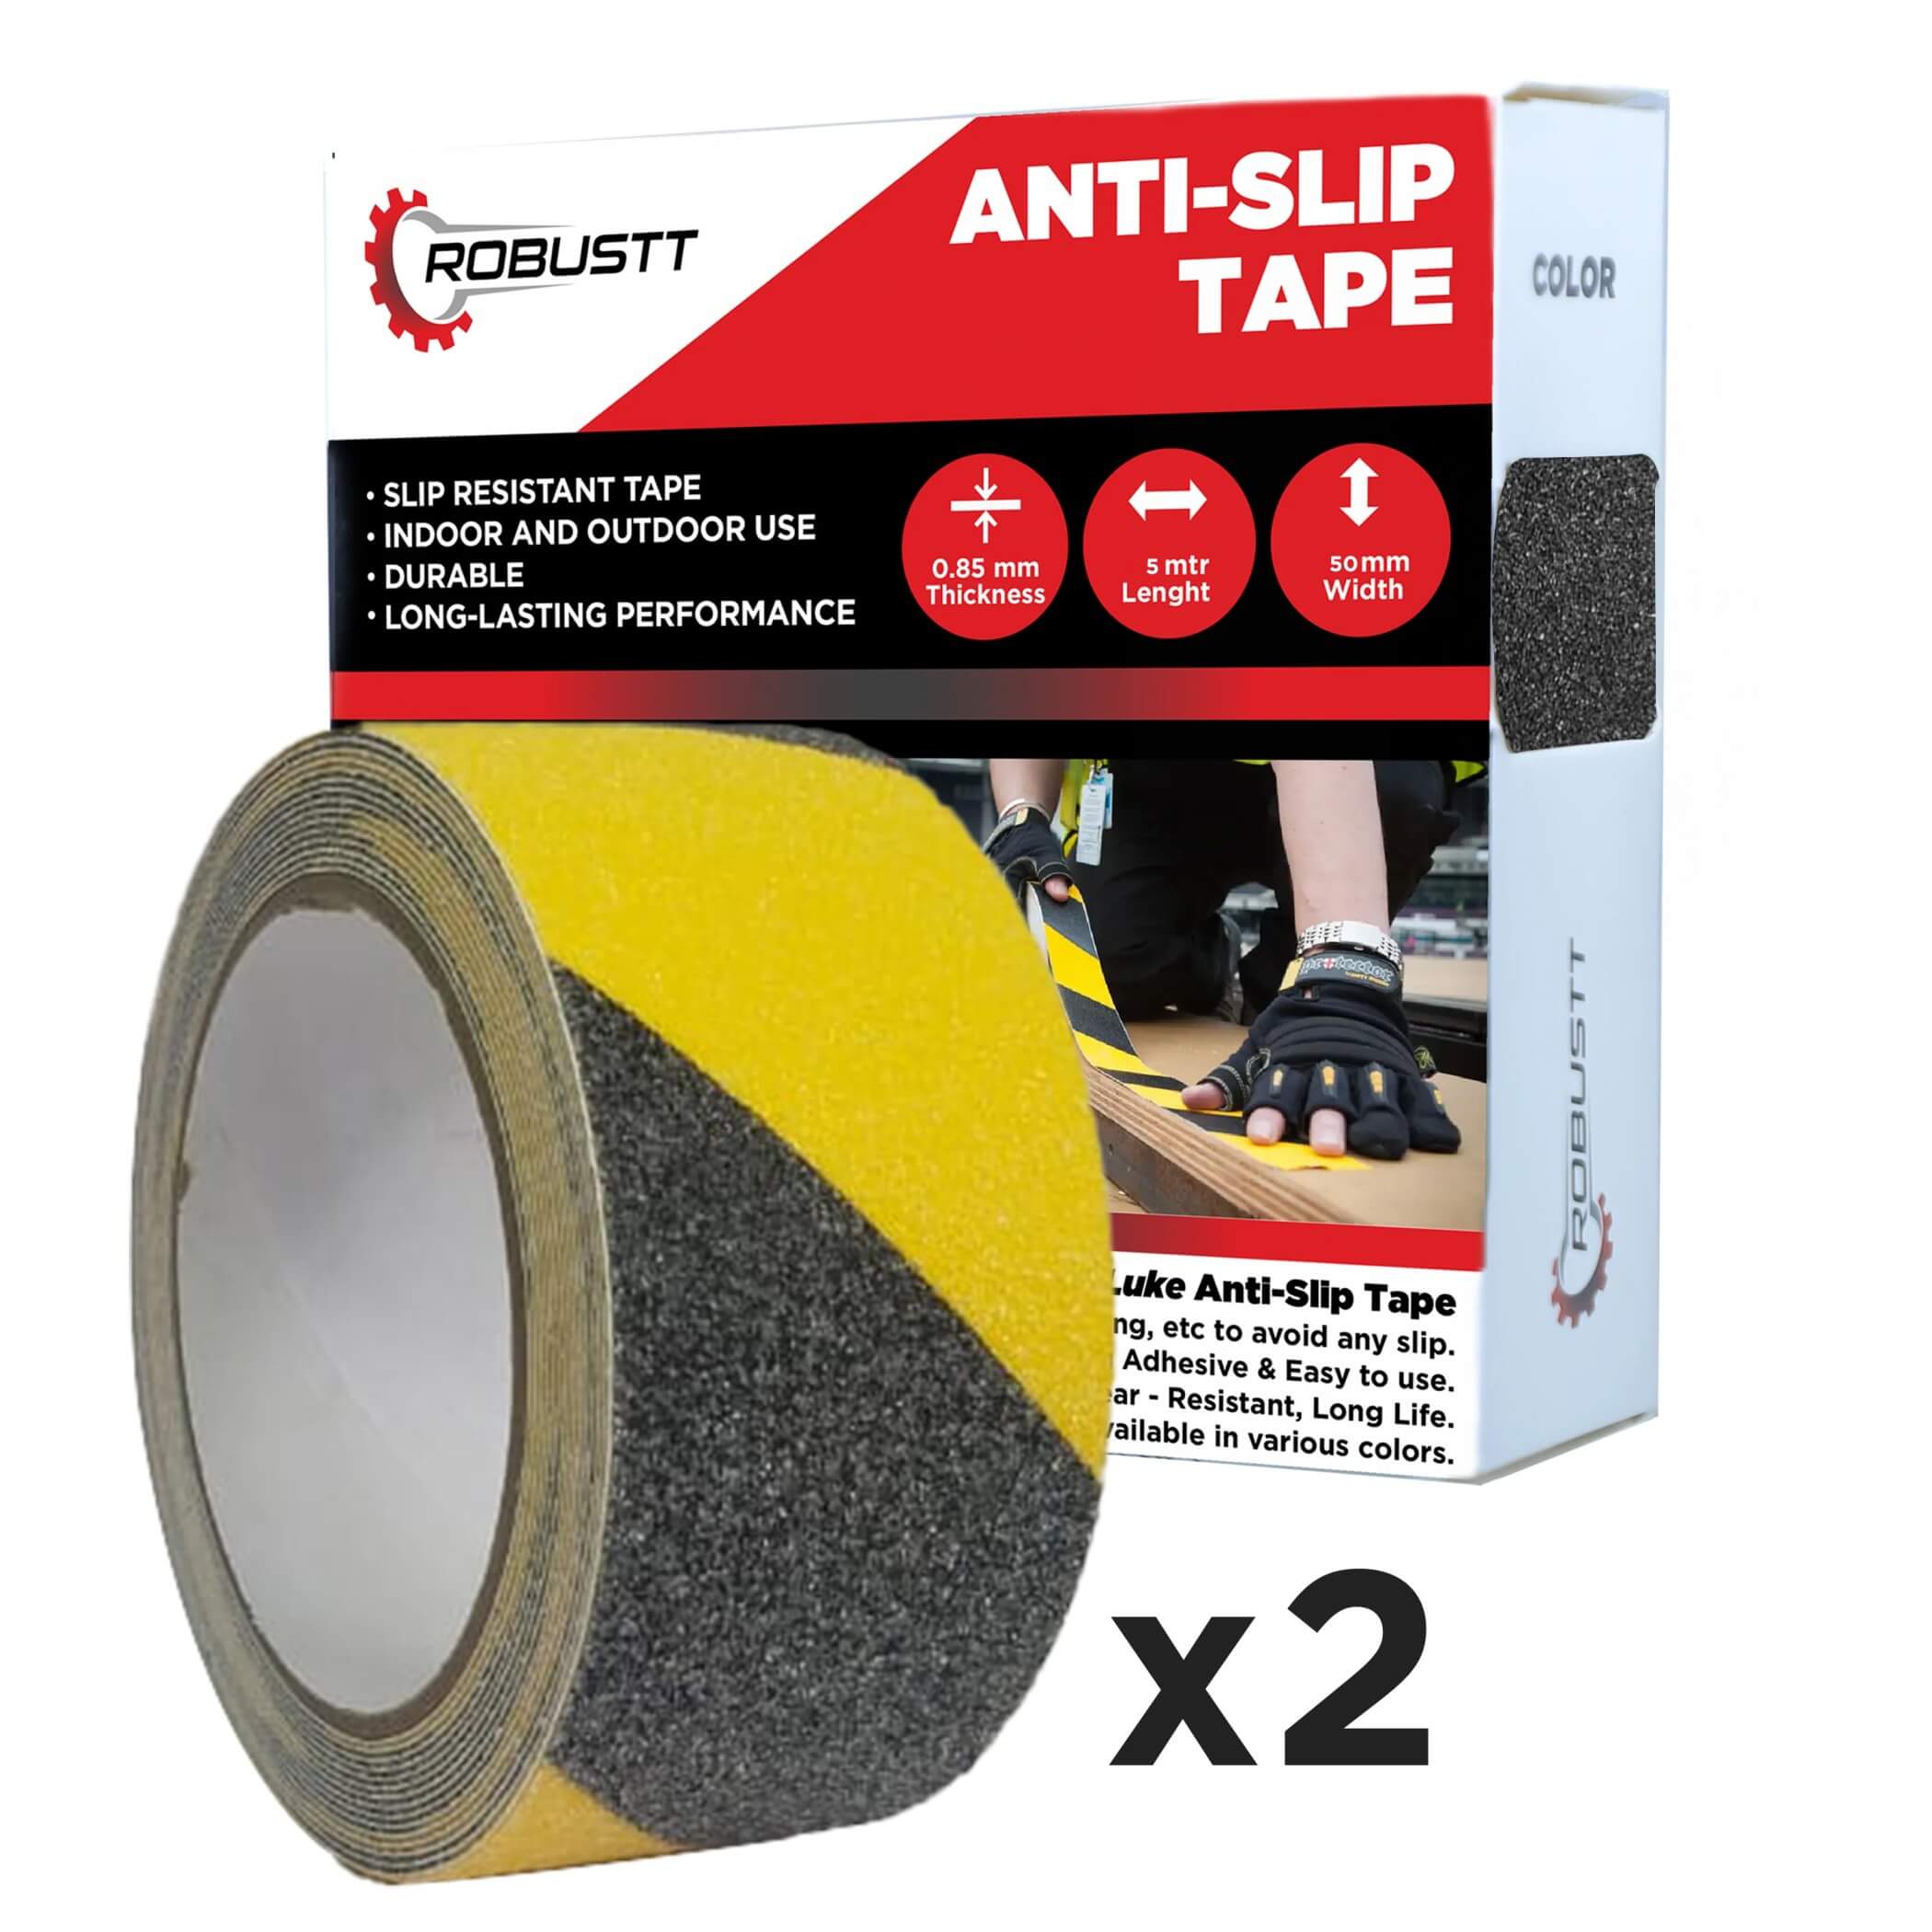 robustt-anti-skid-antislip-5mtr-guaranteed-x50mm-yellow-black-fall-resistant-with-pet-material-and-solvent-acrylic-adhesive-tape-pack-of-2